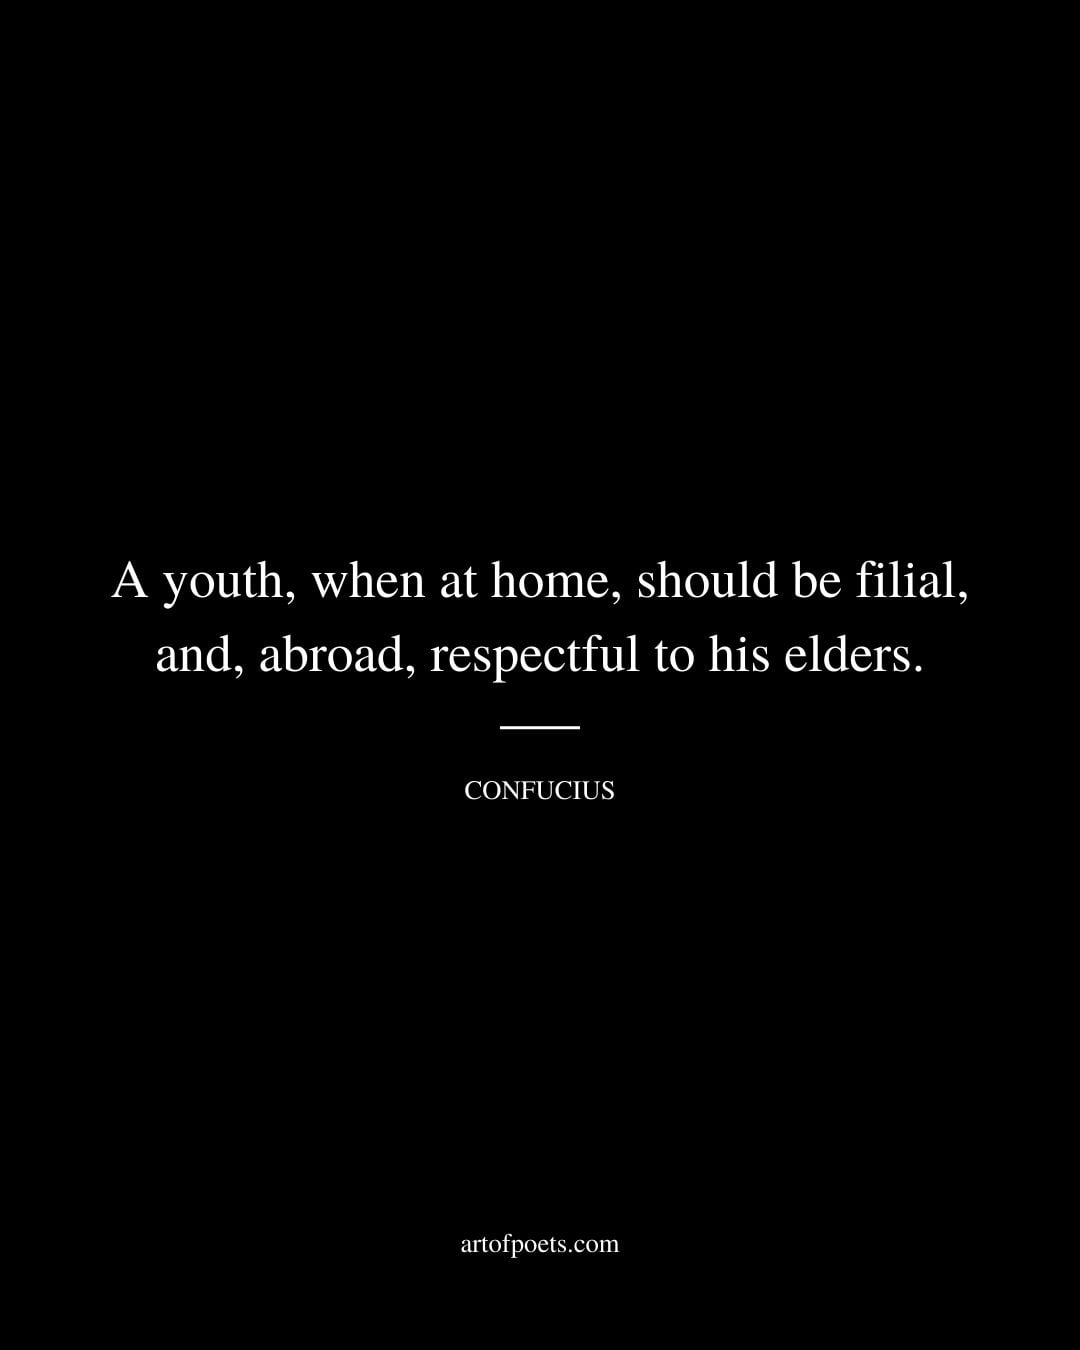 A youth when at home should be filial and abroad respectful to his elders